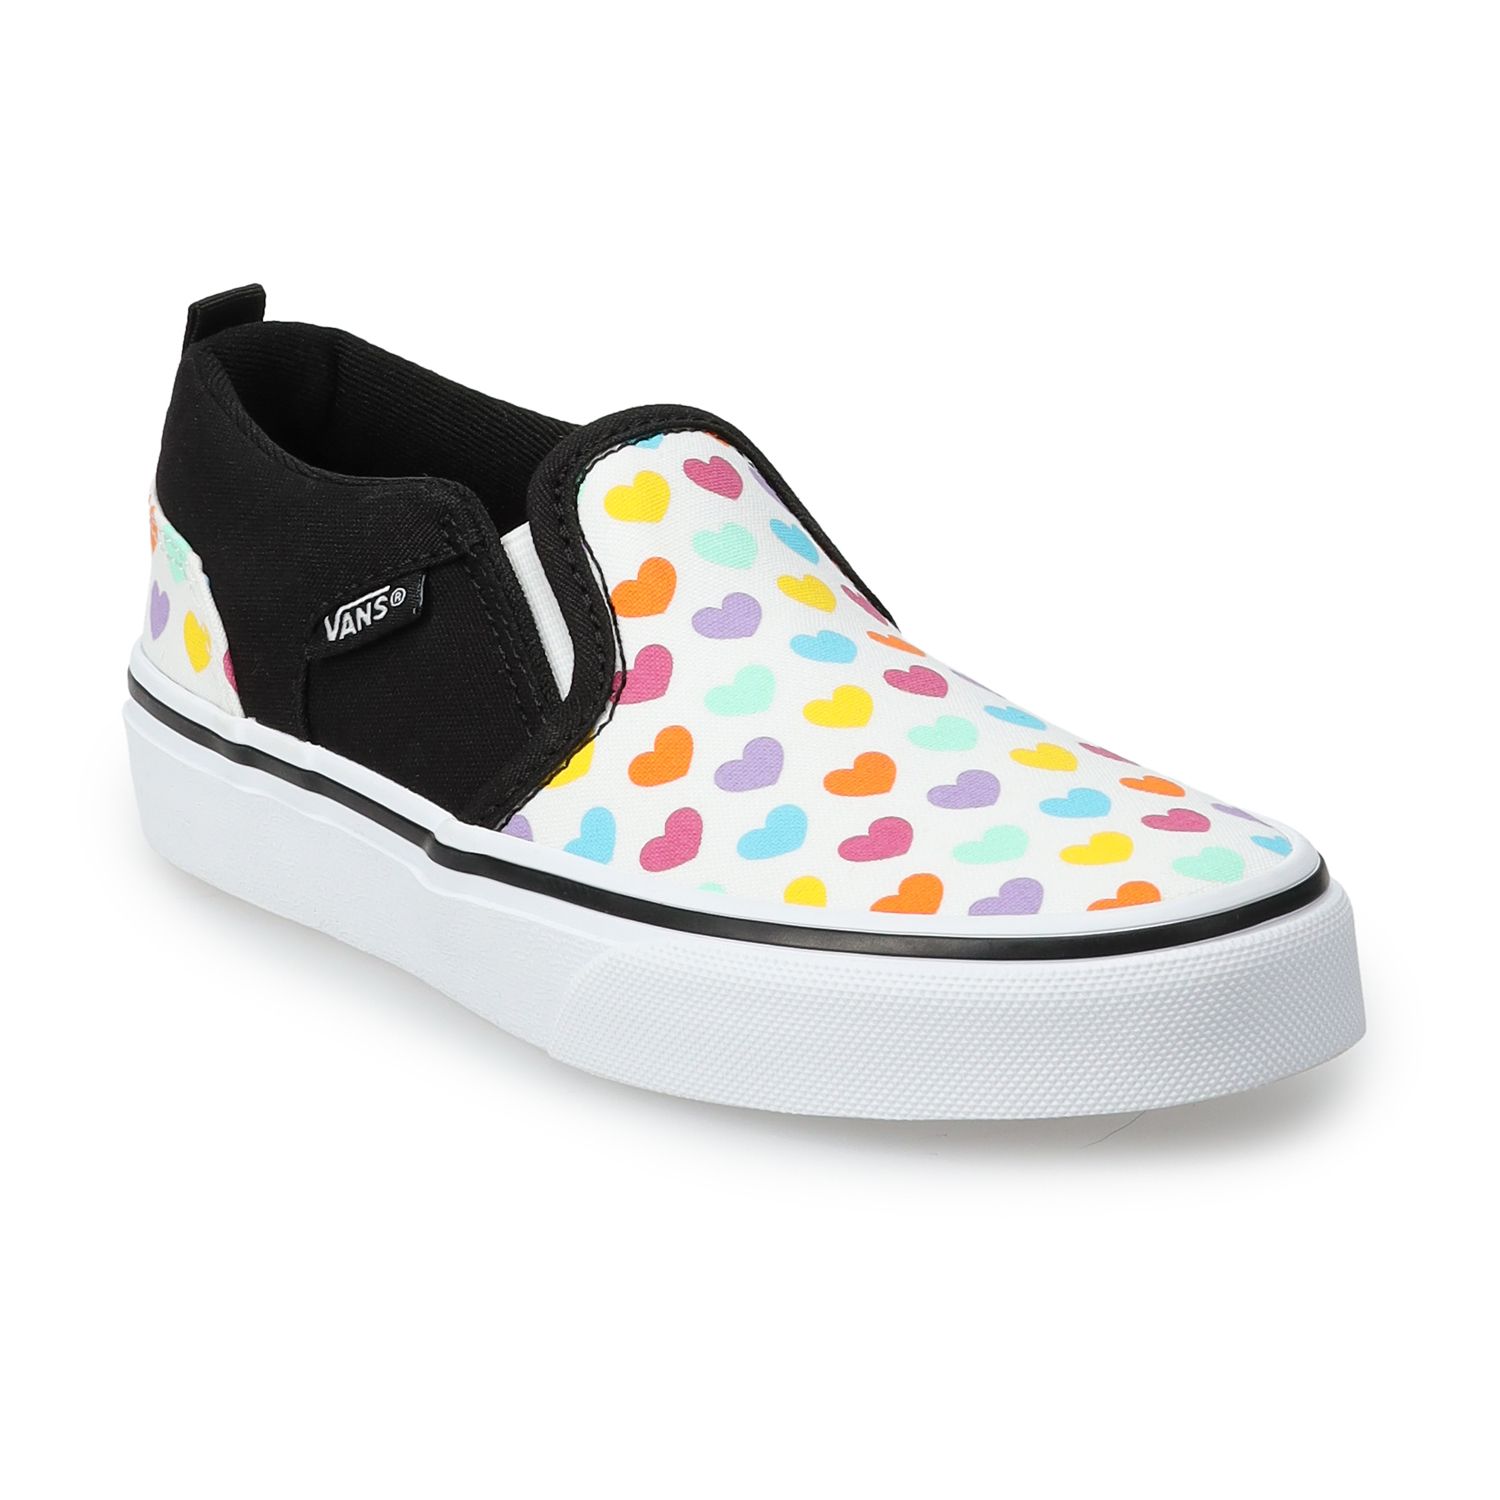 Asher Kids' Rainbow Checkered Skate Shoes